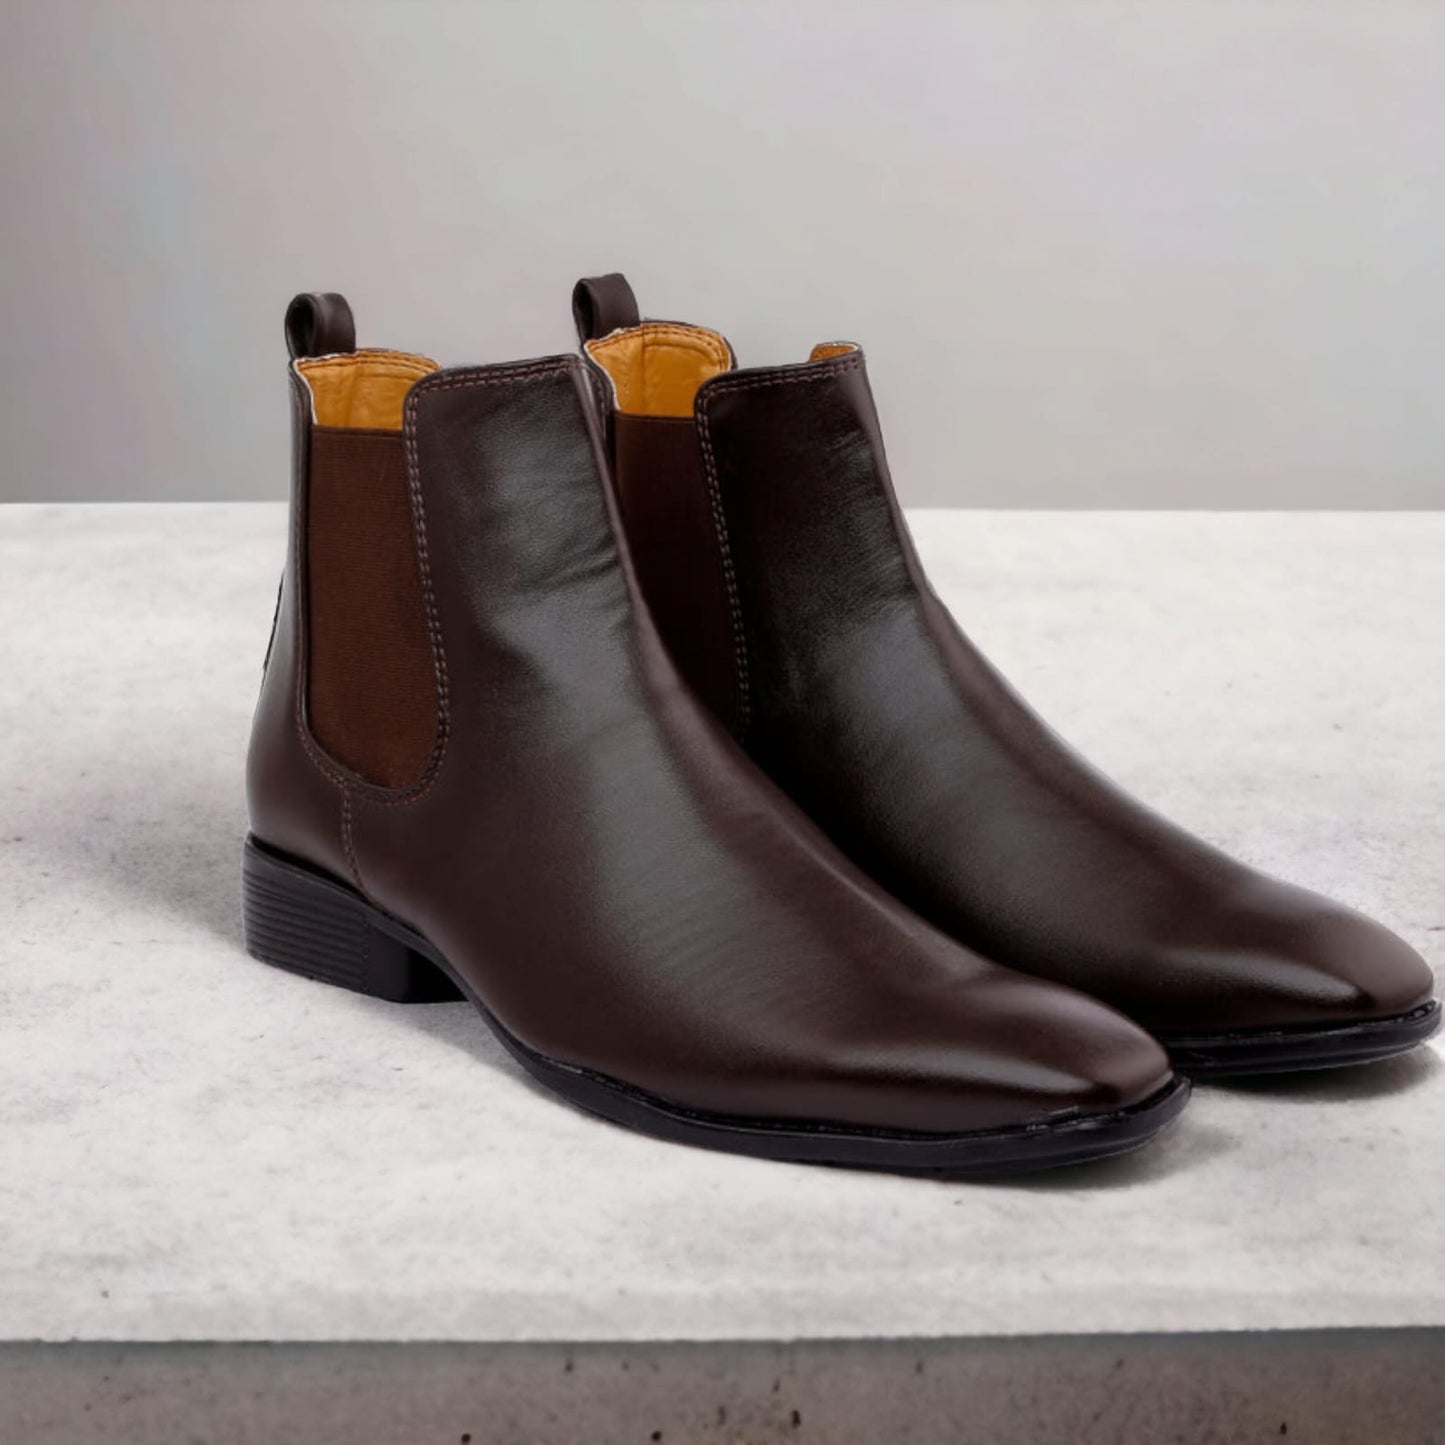 Jack Marc Men's Stylish Brown Formal and Casual Wear British Chelsea Ankle Boots